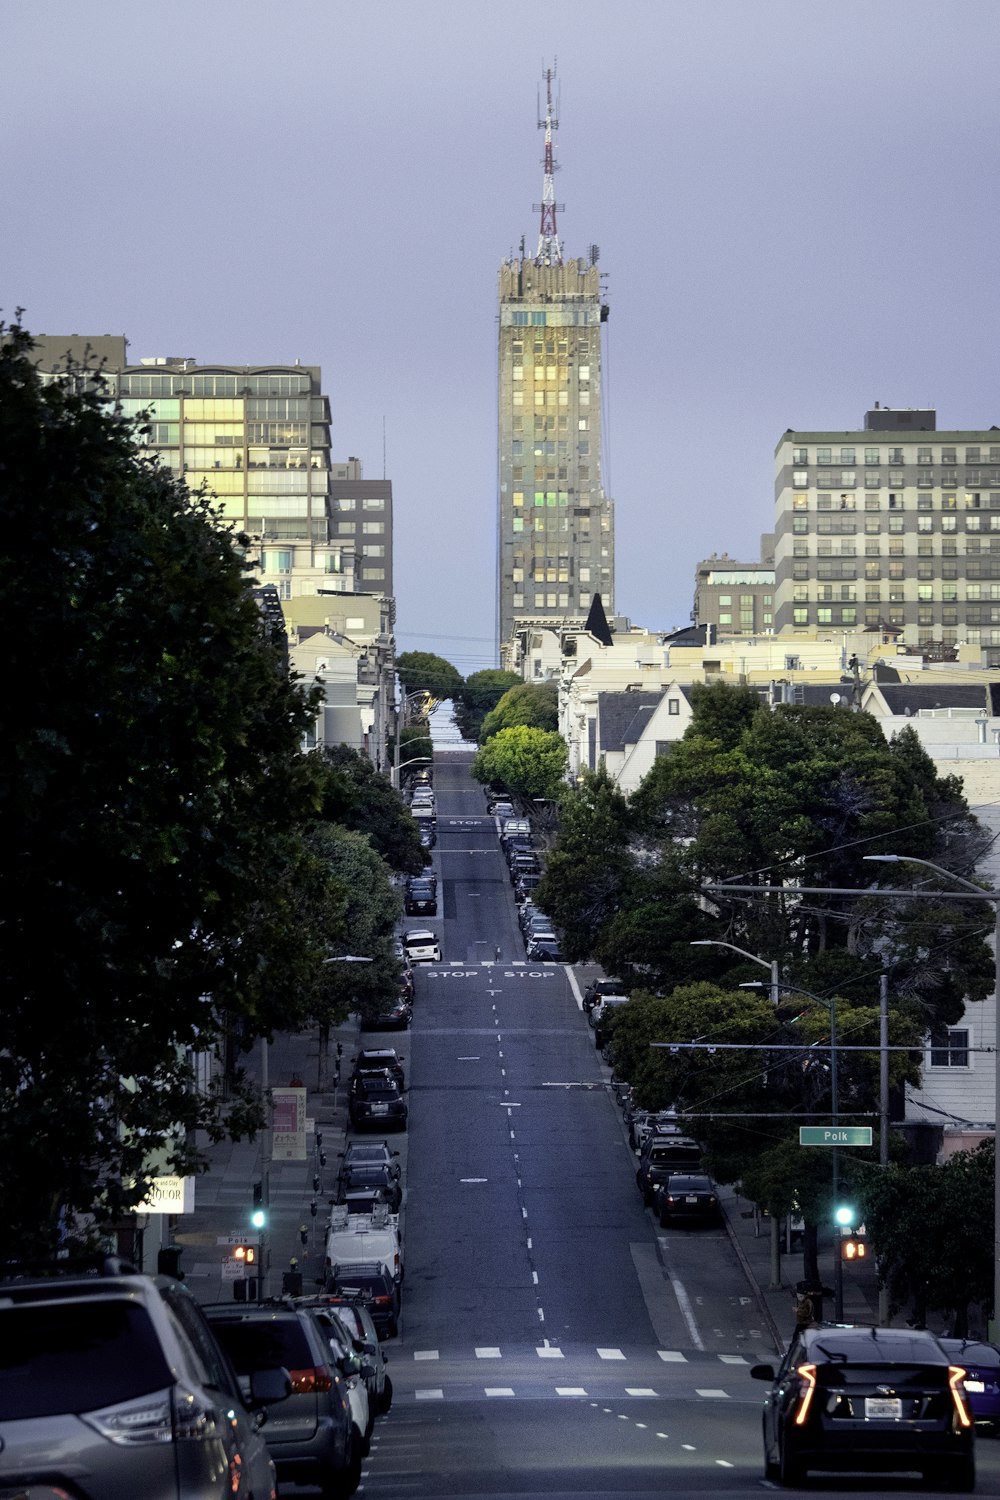 a view of a city street with a clock tower in the background